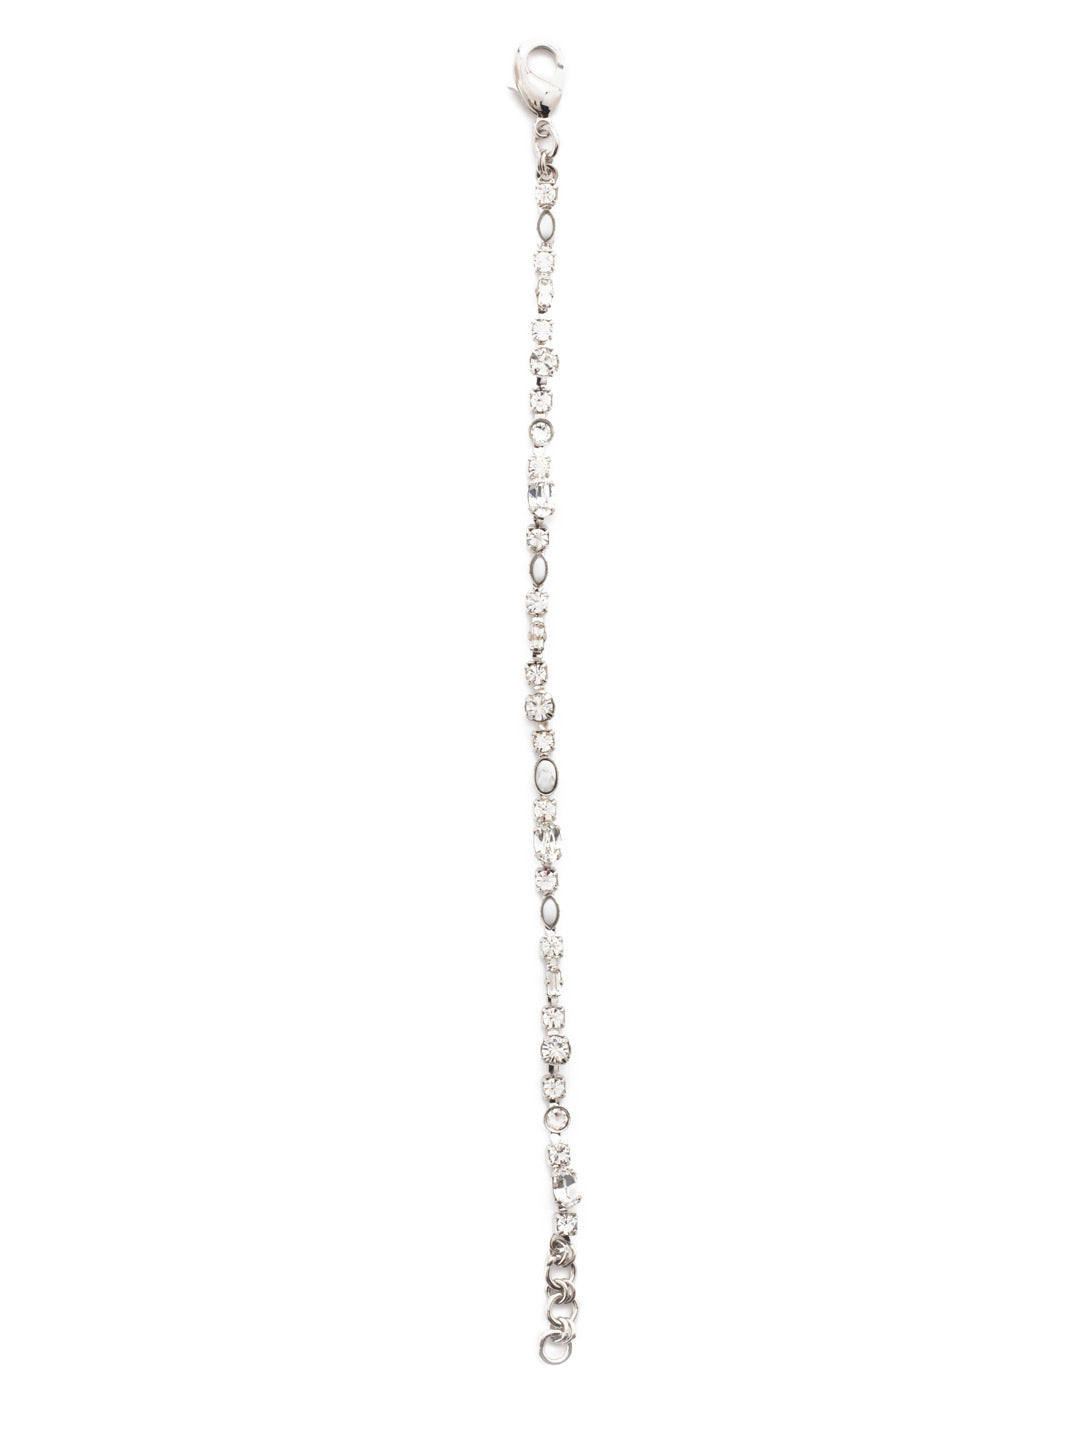 Lobelia Tennis Bracelet - BDR20RHCRY - <p>A slim style adorned with petite crystals and cabochons. Delicate and detailed! From Sorrelli's Crystal collection in our Palladium Silver-tone finish.</p>